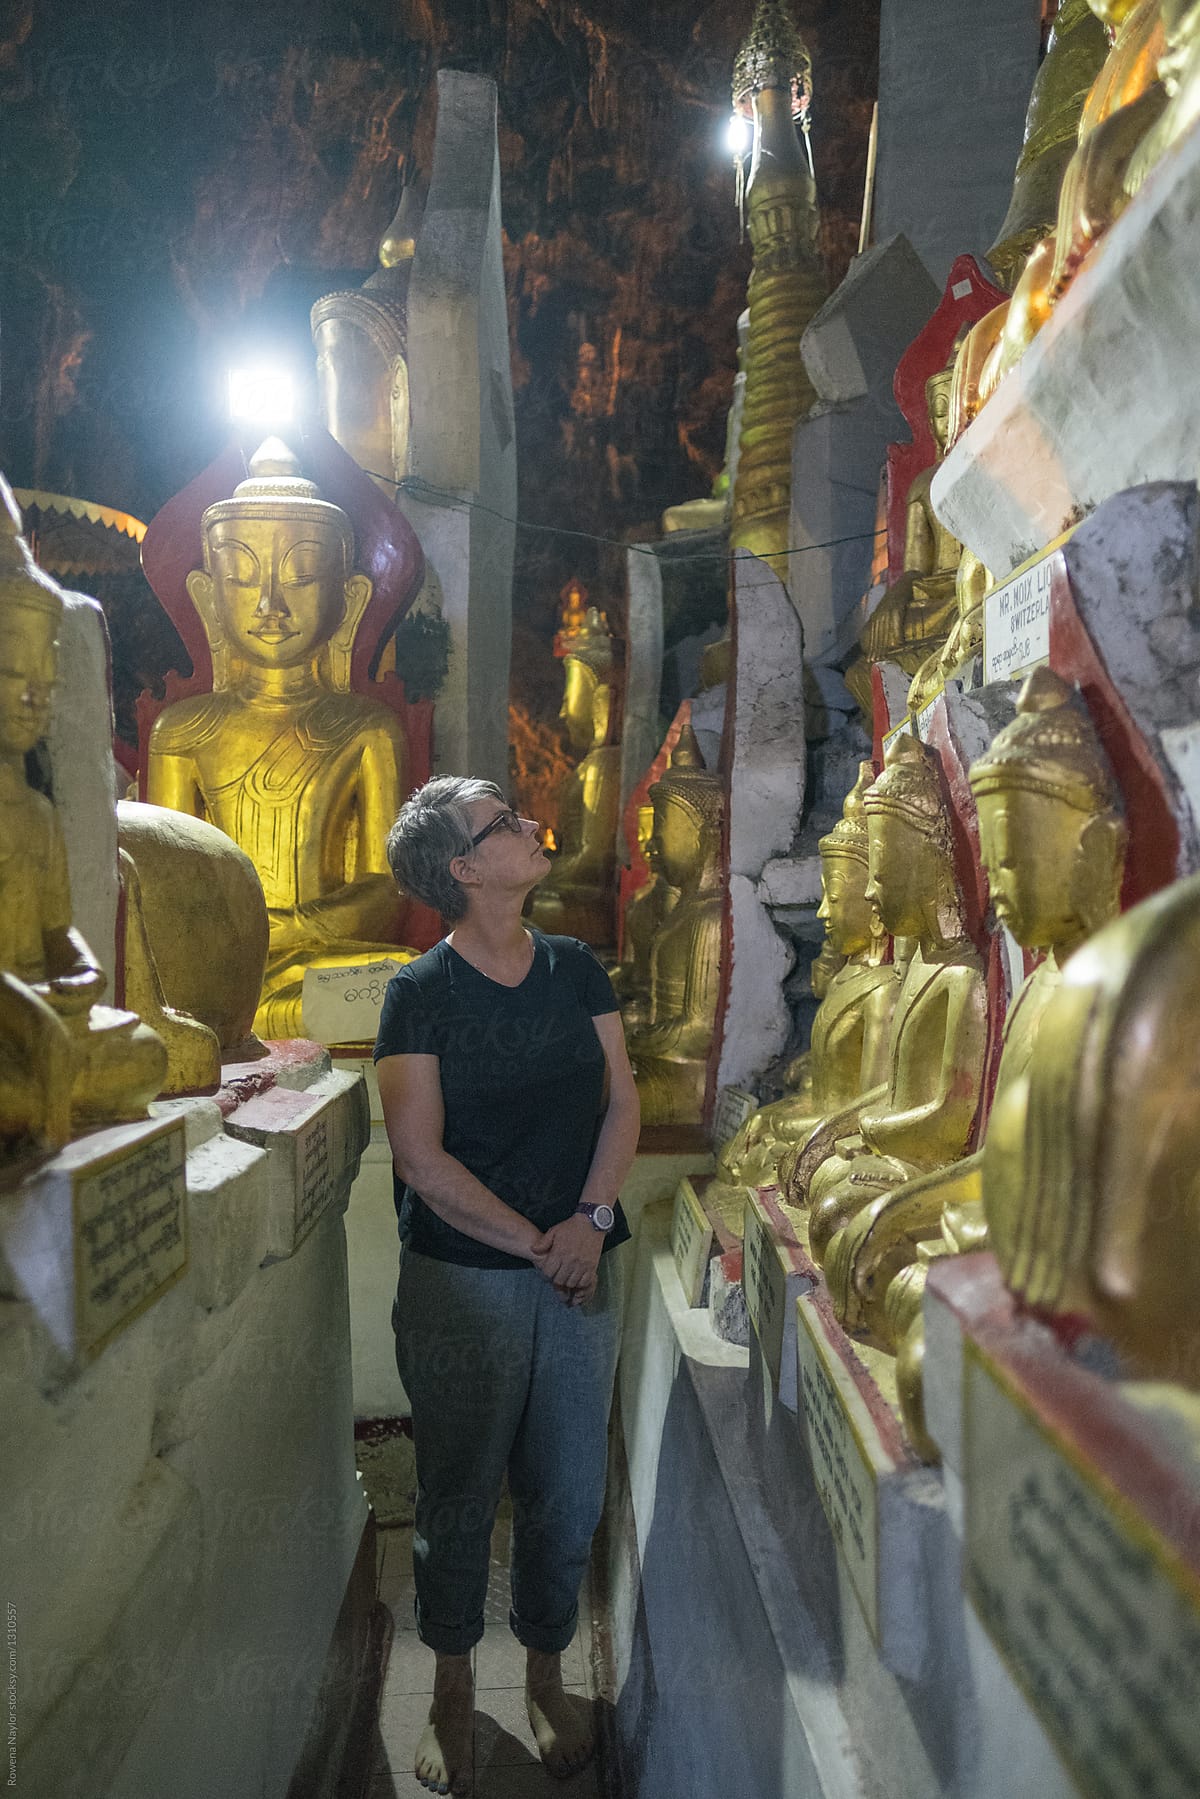 Tourist admiring some of the Buddha statues in the Pindaya Cave,